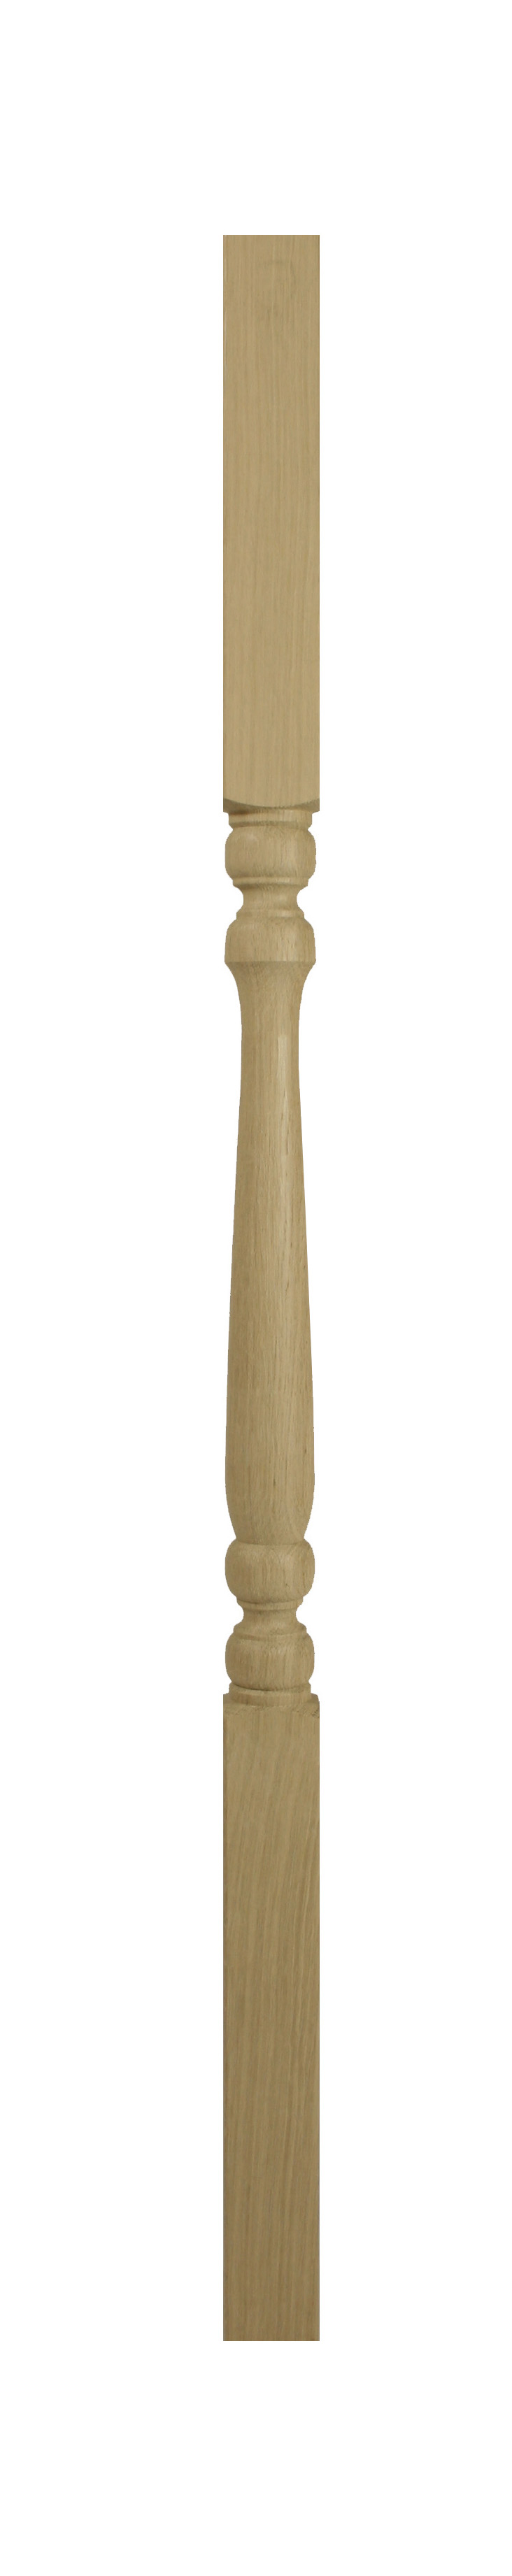 1 Oak Colonial Spindle 900 41